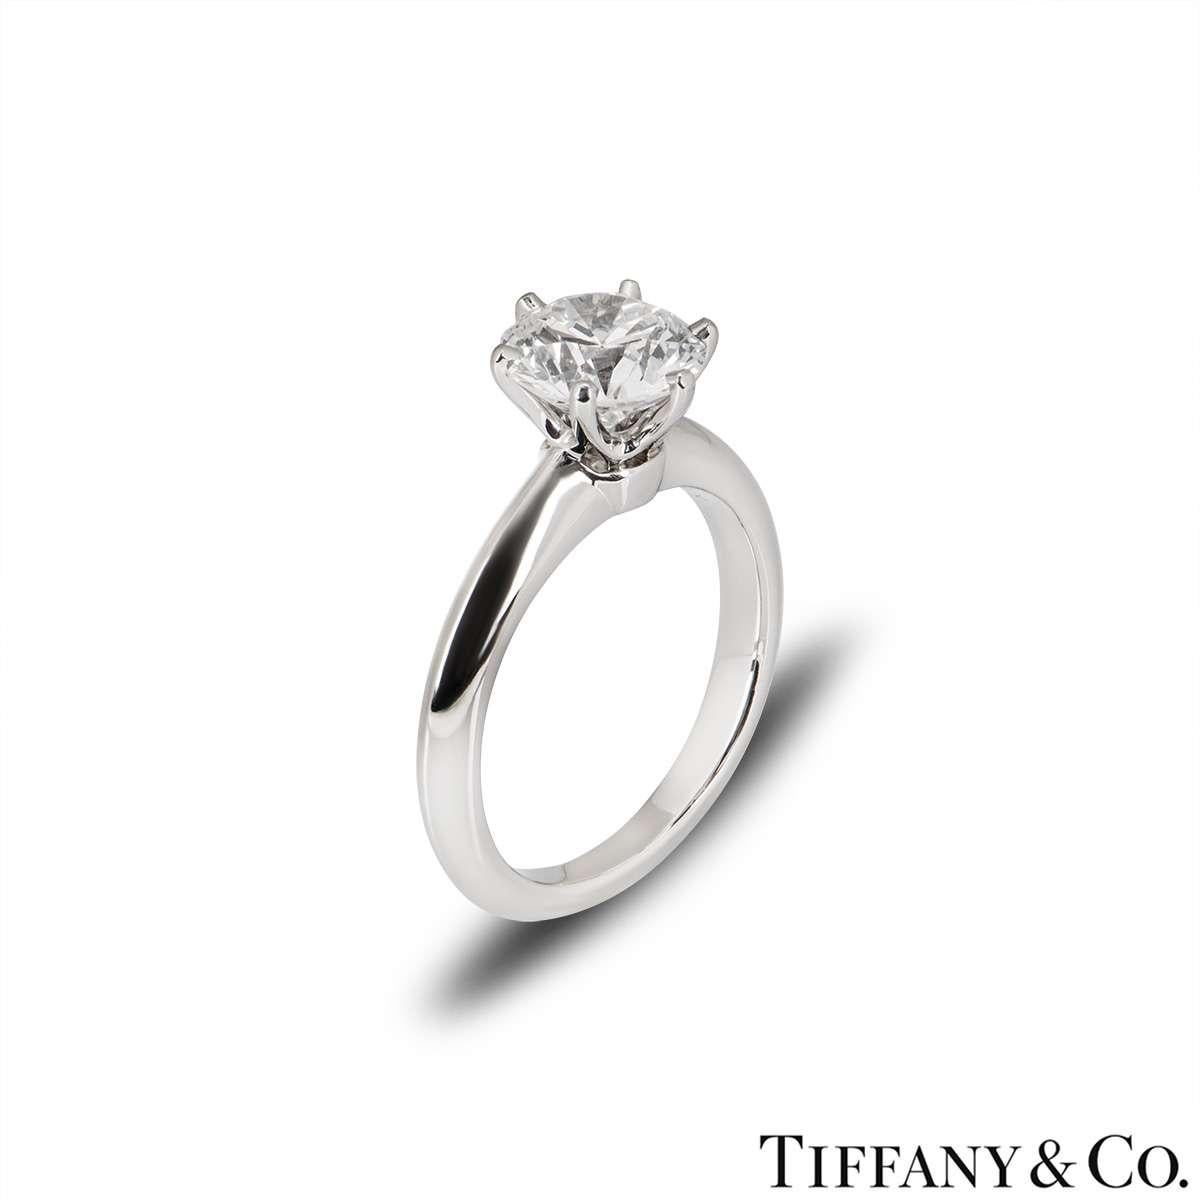 A beautiful platinum diamond ring by Tiffany & Co. from The Setting collection. The ring comprises of a round brilliant cut diamond in a 6 claw setting with a weight of 1.53ct, G colour and VVS2 clarity. The diamond scores an excellent rating in all